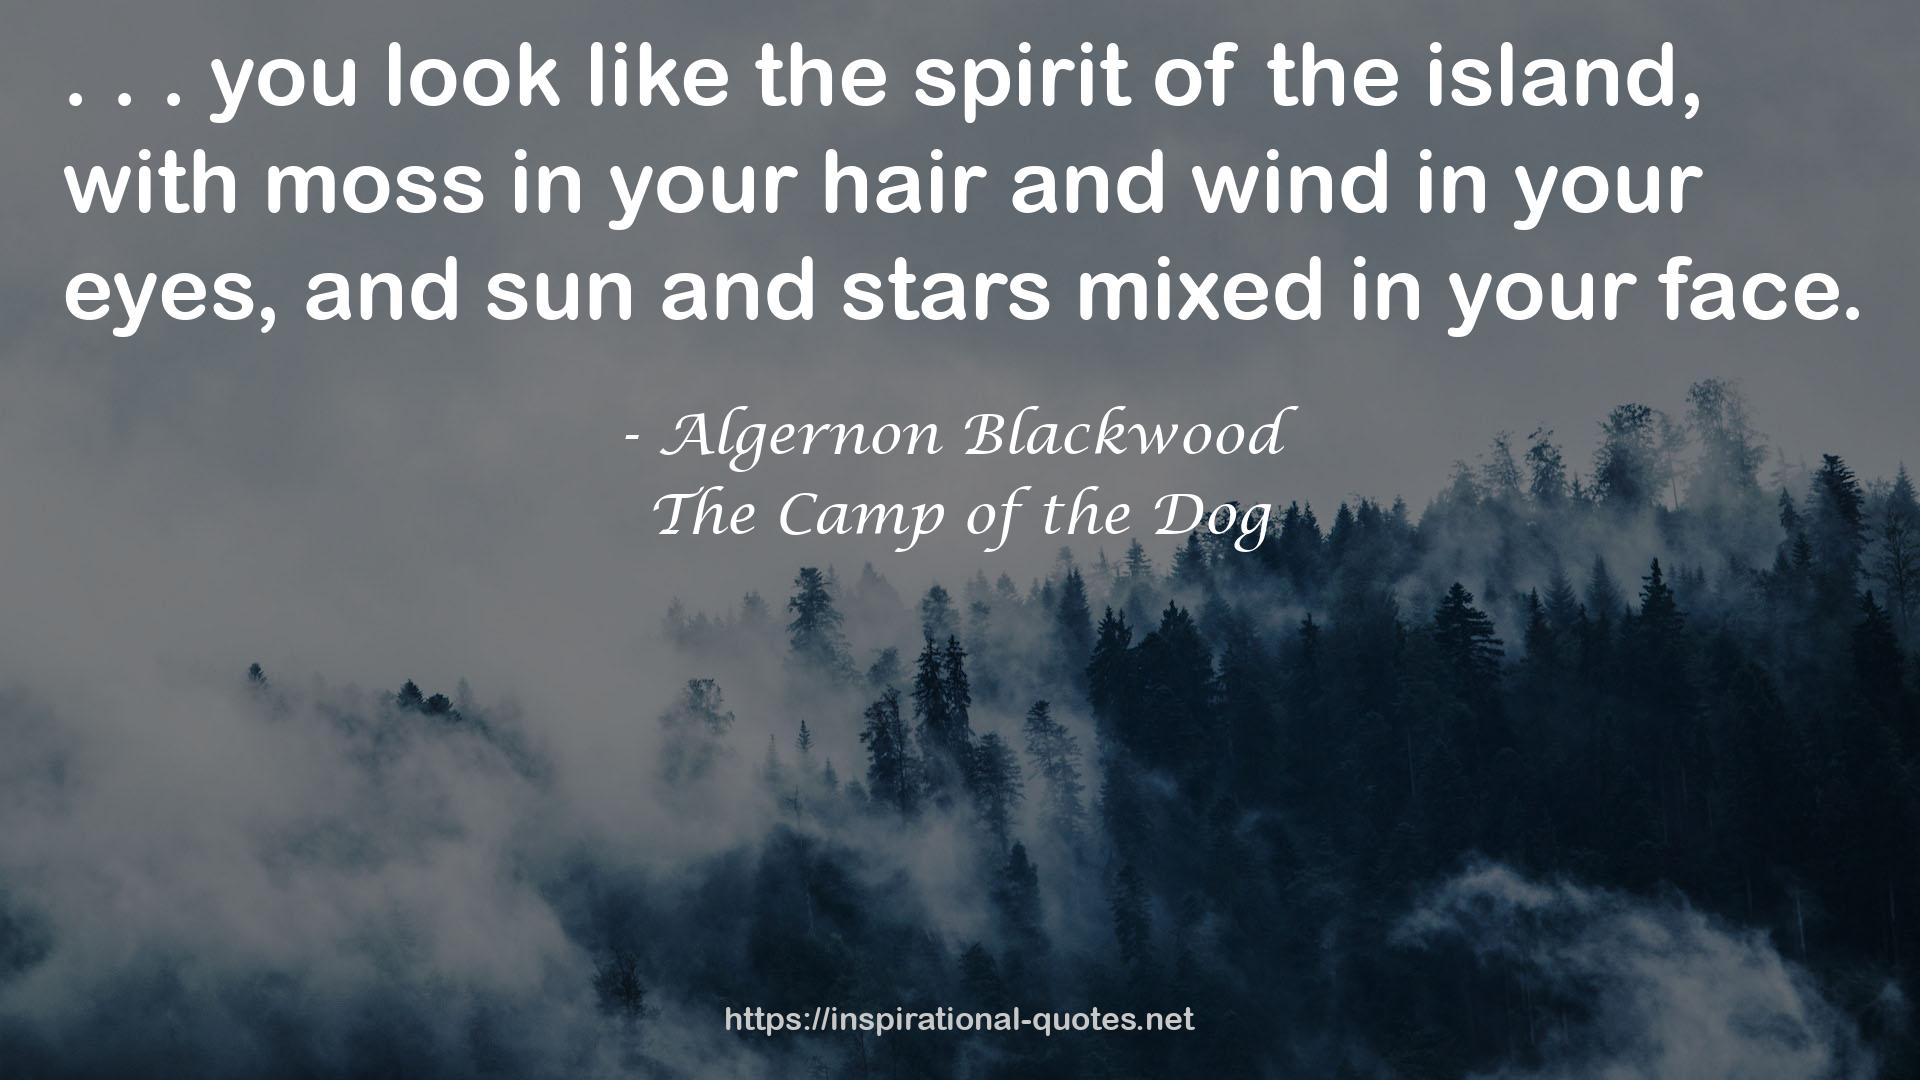 The Camp of the Dog QUOTES